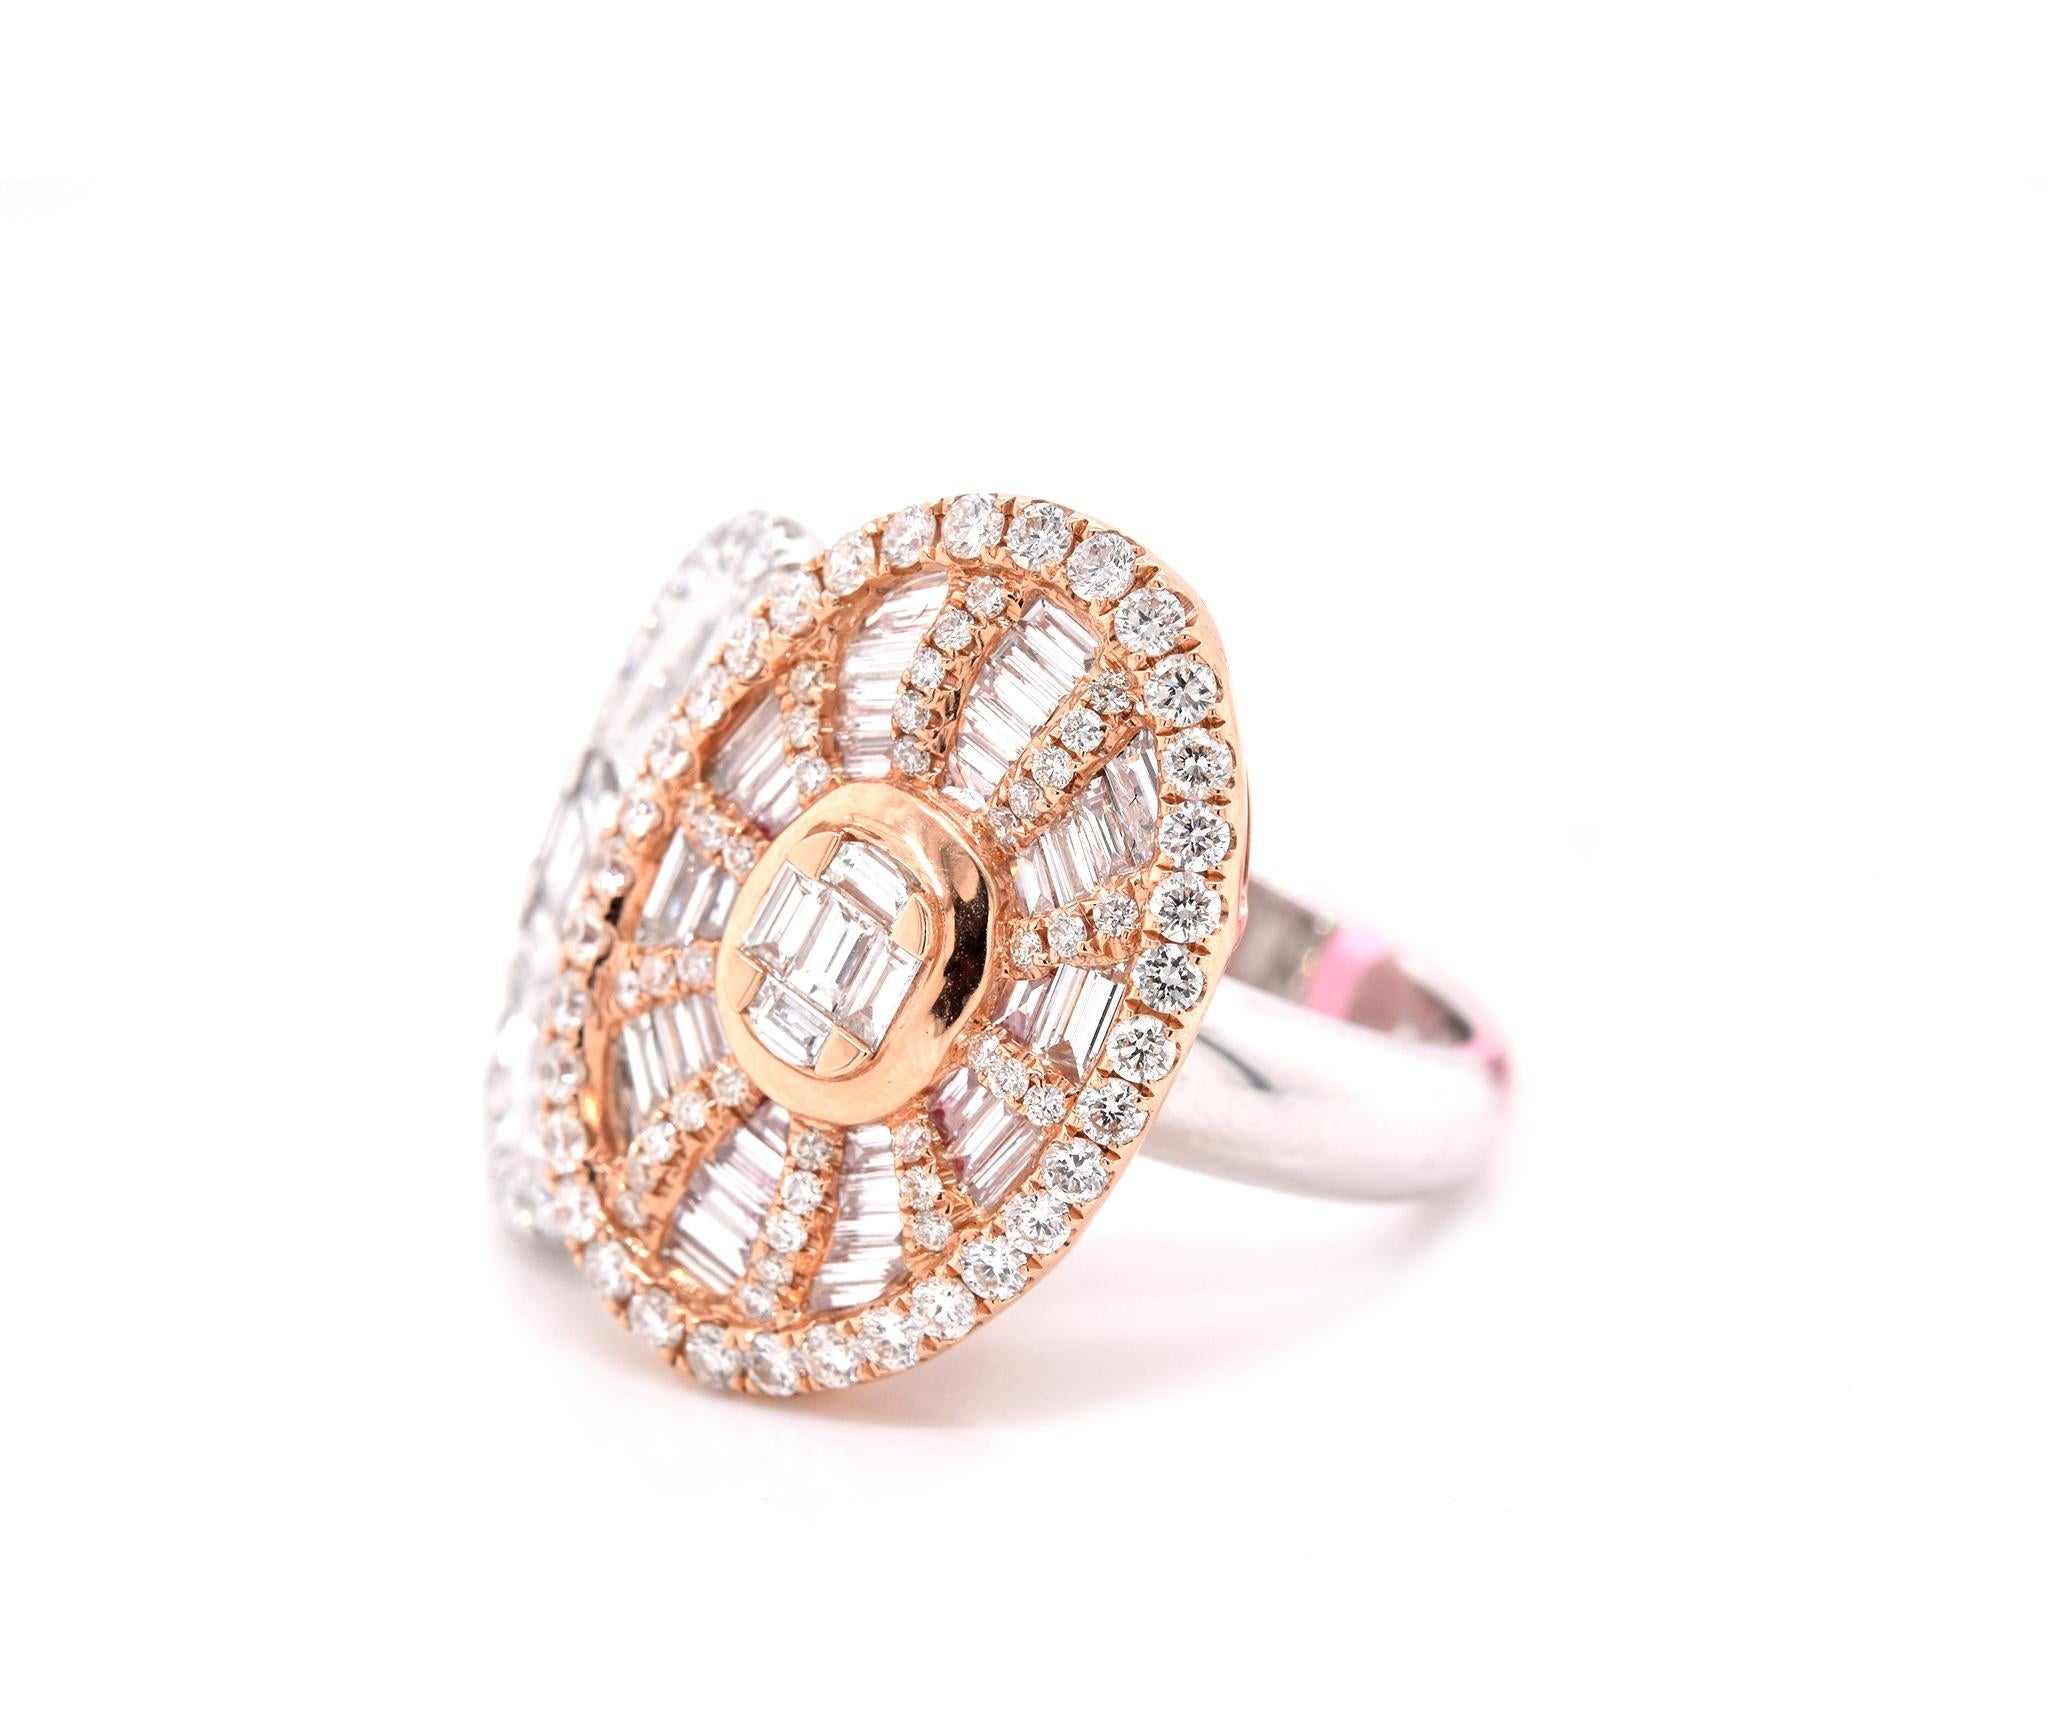 Material: 18k rose & white gold
Diamonds: 92 round brilliant cut = 1.41cttw
Color: G	
Clarity: VS
Diamonds: 66 baguette cut = 2.21cttw
Color: G
Clarity: VS
Ring size: 6.5 (please allow two additional shipping days for sizing requests) 
Dimensions: